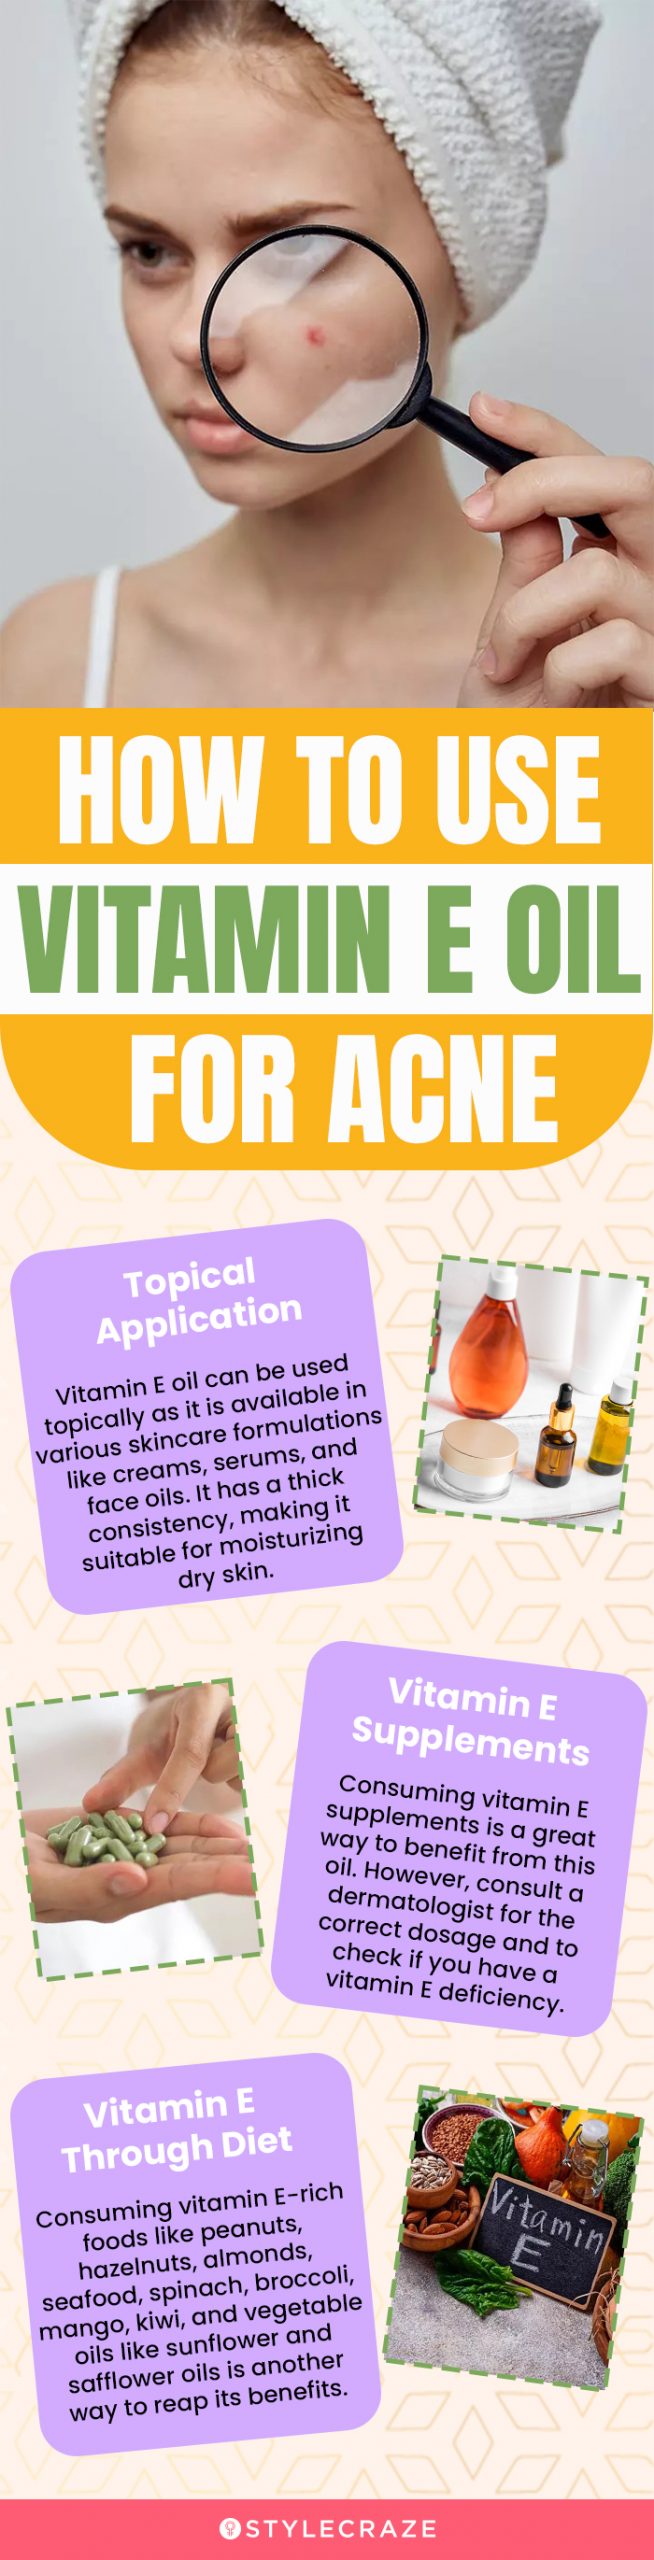 how to use vitamin e oil for acne (infographic)